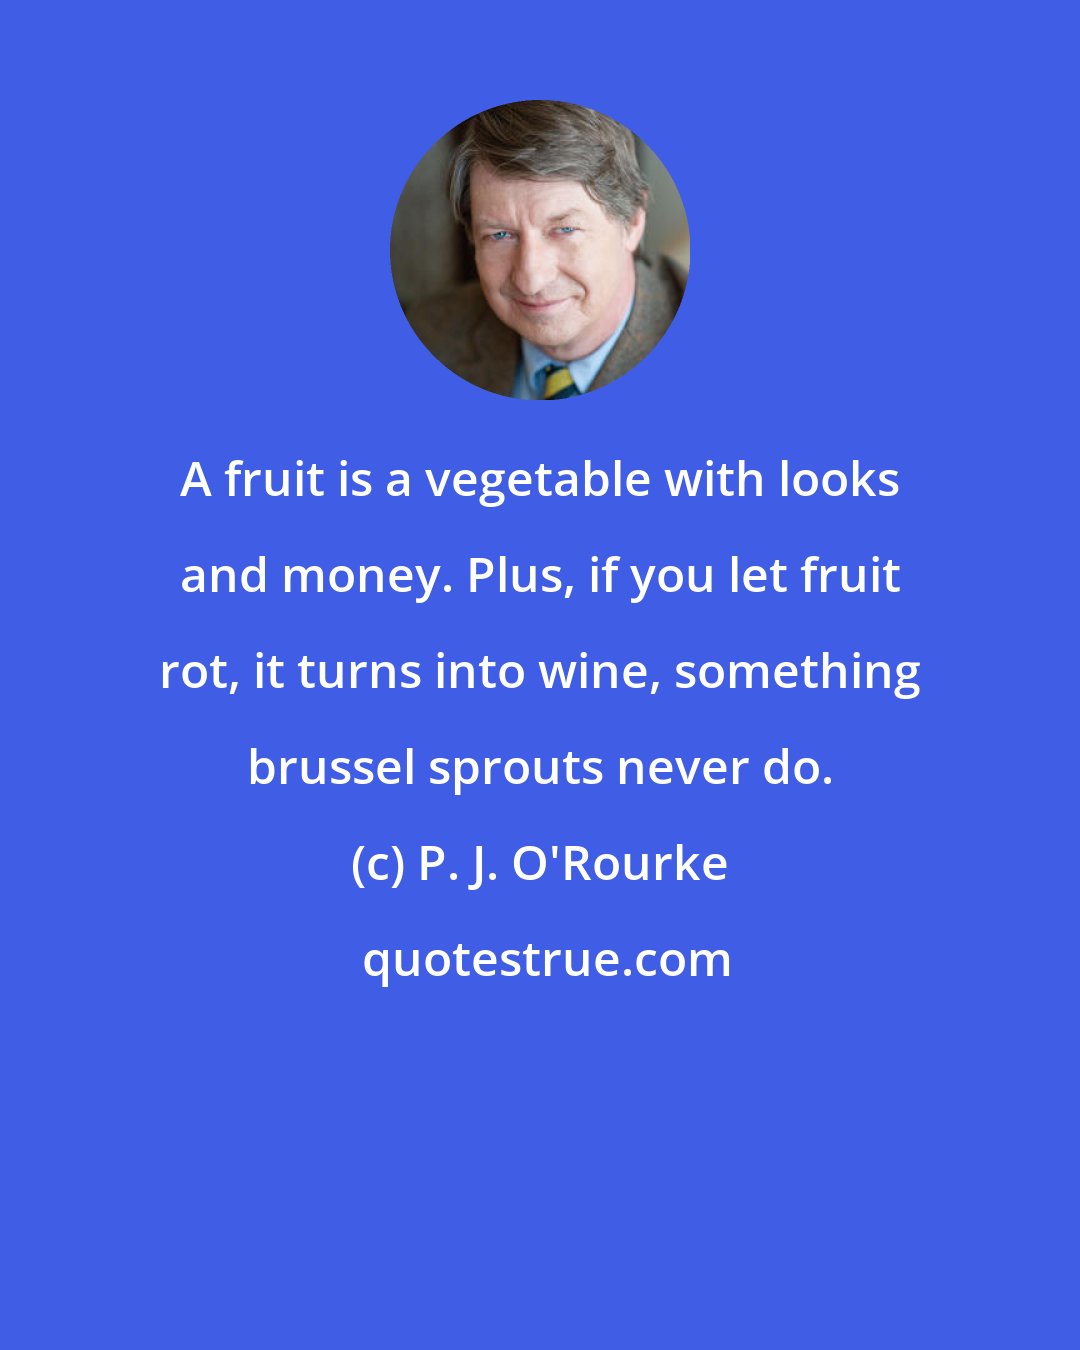 P. J. O'Rourke: A fruit is a vegetable with looks and money. Plus, if you let fruit rot, it turns into wine, something brussel sprouts never do.